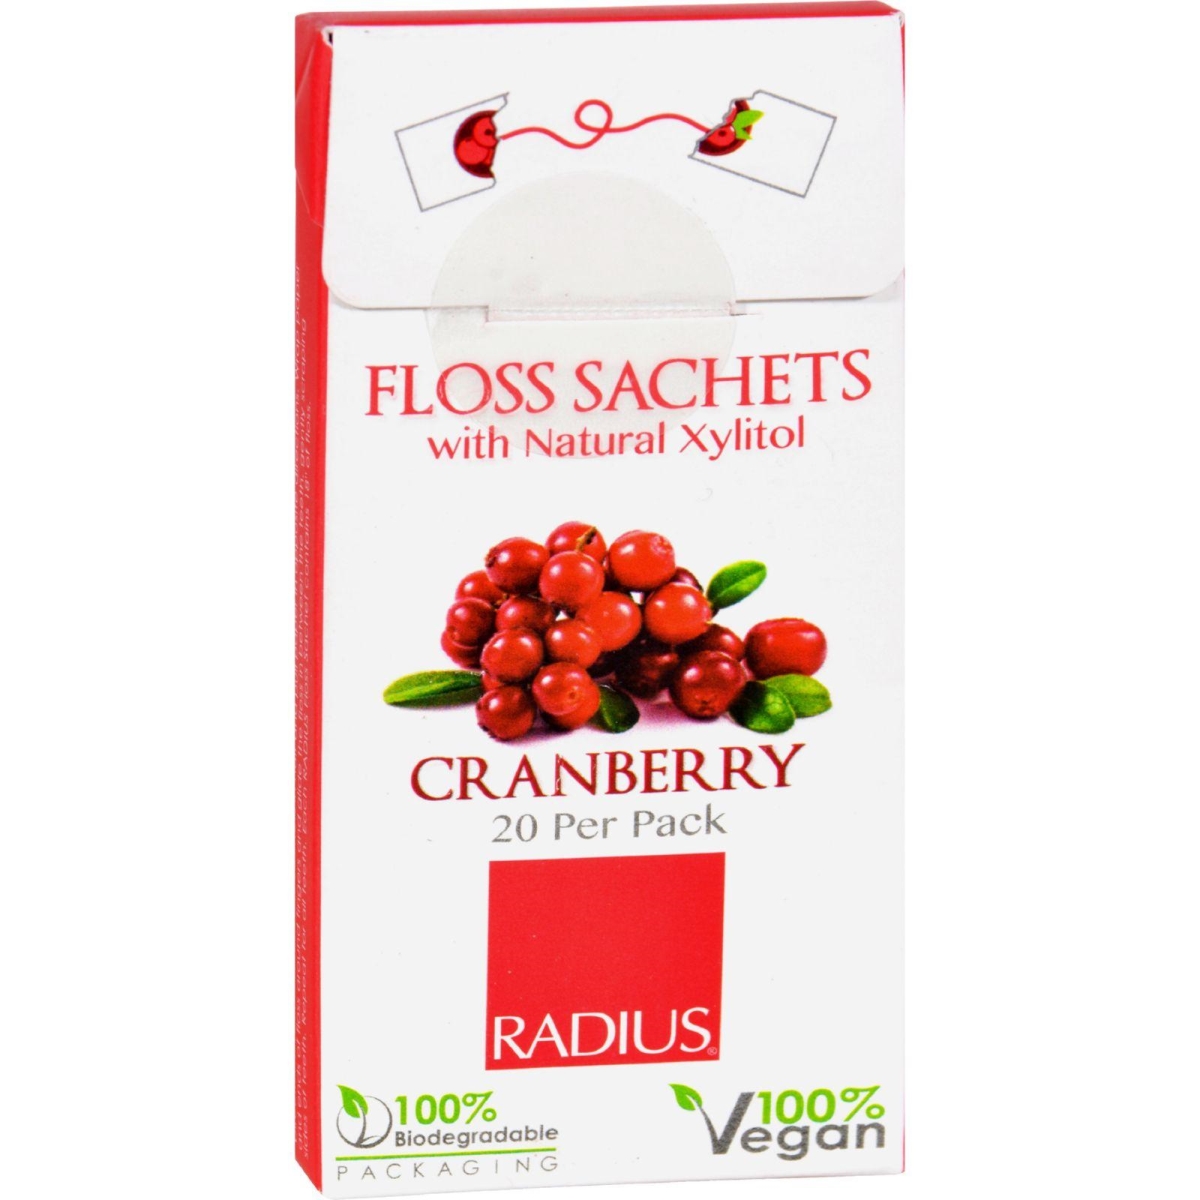 Hg1152297 Floss Sachets With Natural Xylitol - Cranberry - Case Of 20